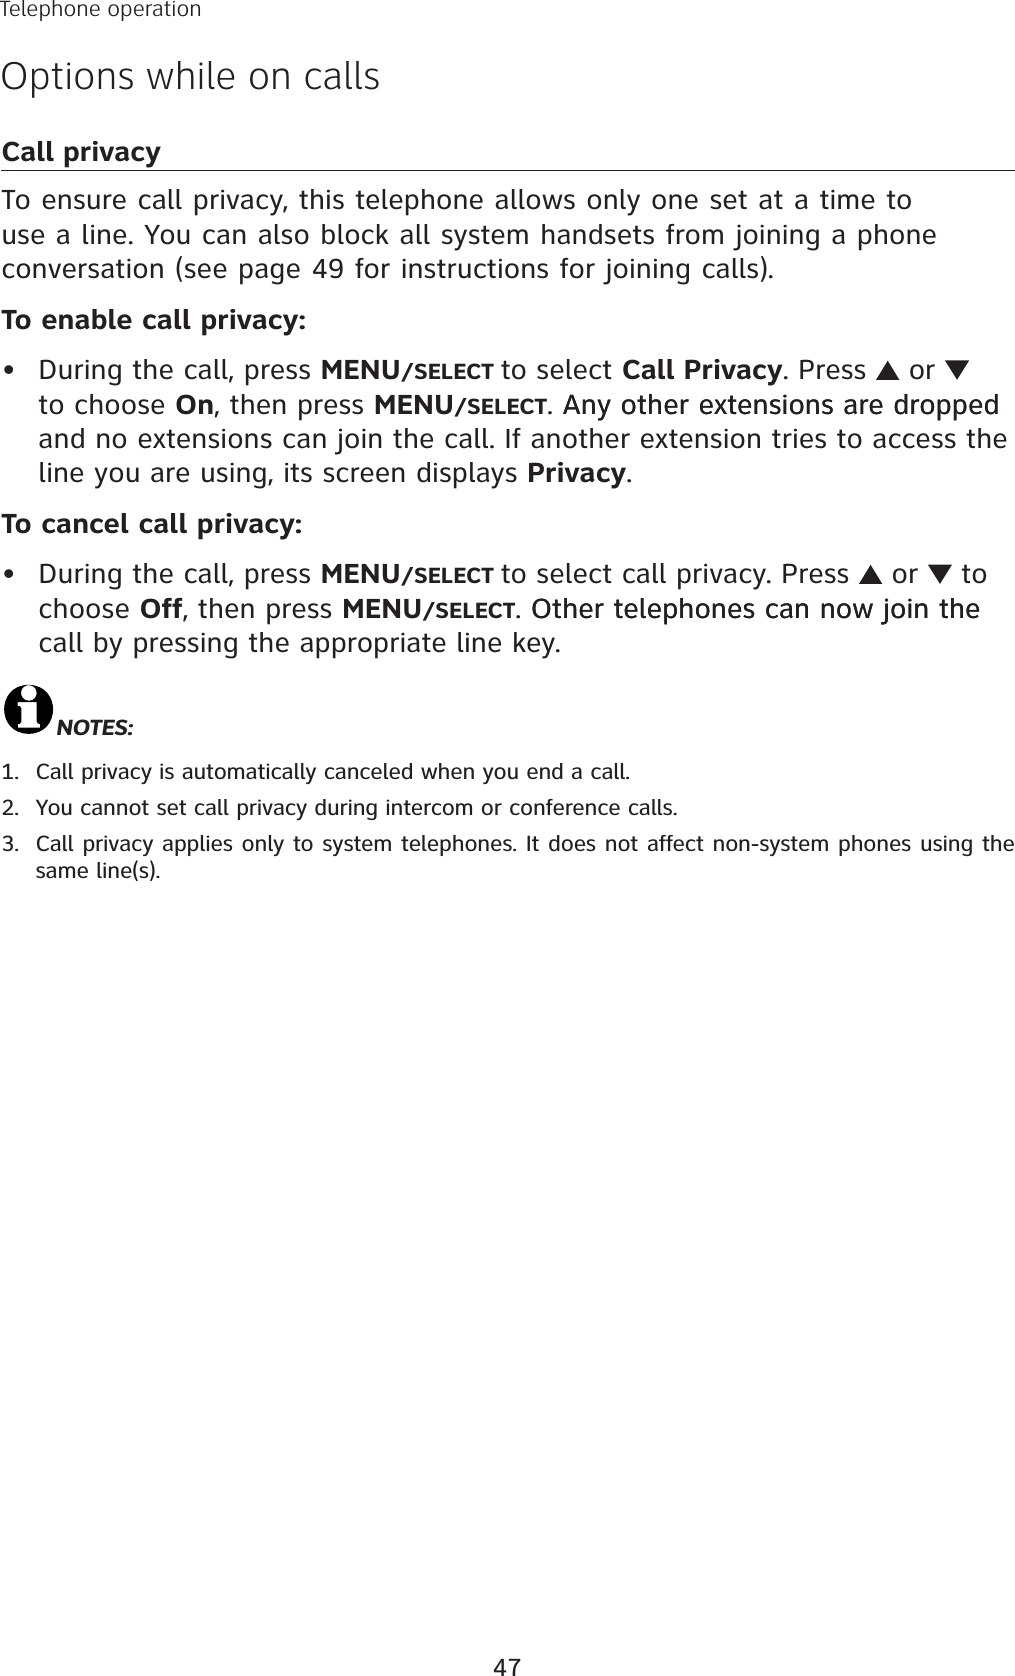 47Telephone operationOptions while on callsCall privacyTo ensure call privacy, this telephone allows only one set at a time to use a line. You can also block all system handsets from joining a phone conversation (see page 49 for instructions for joining calls).To enable call privacy:During the call, press MENU/SELECT to select Call Privacy. Press   or to choose On, then press MENU/SELECT. Any other extensions are dropped Any other extensions are dropped and no extensions can join the call. If another extension tries to access the line you are using, its screen displays Privacy.To cancel call privacy:During the call, press MENU/SELECT to select call privacy. Press   or   to choose Off, then press MENU/SELECT. Other telephones can now join the Other telephones can now join the call by pressing the appropriate line key. NOTES:Call privacy is automatically canceled when you end a call. You cannot set call privacy during intercom or conference calls.Call privacy applies only to system telephones. It does not affect non-system phones using the same line(s).••1.2.3.